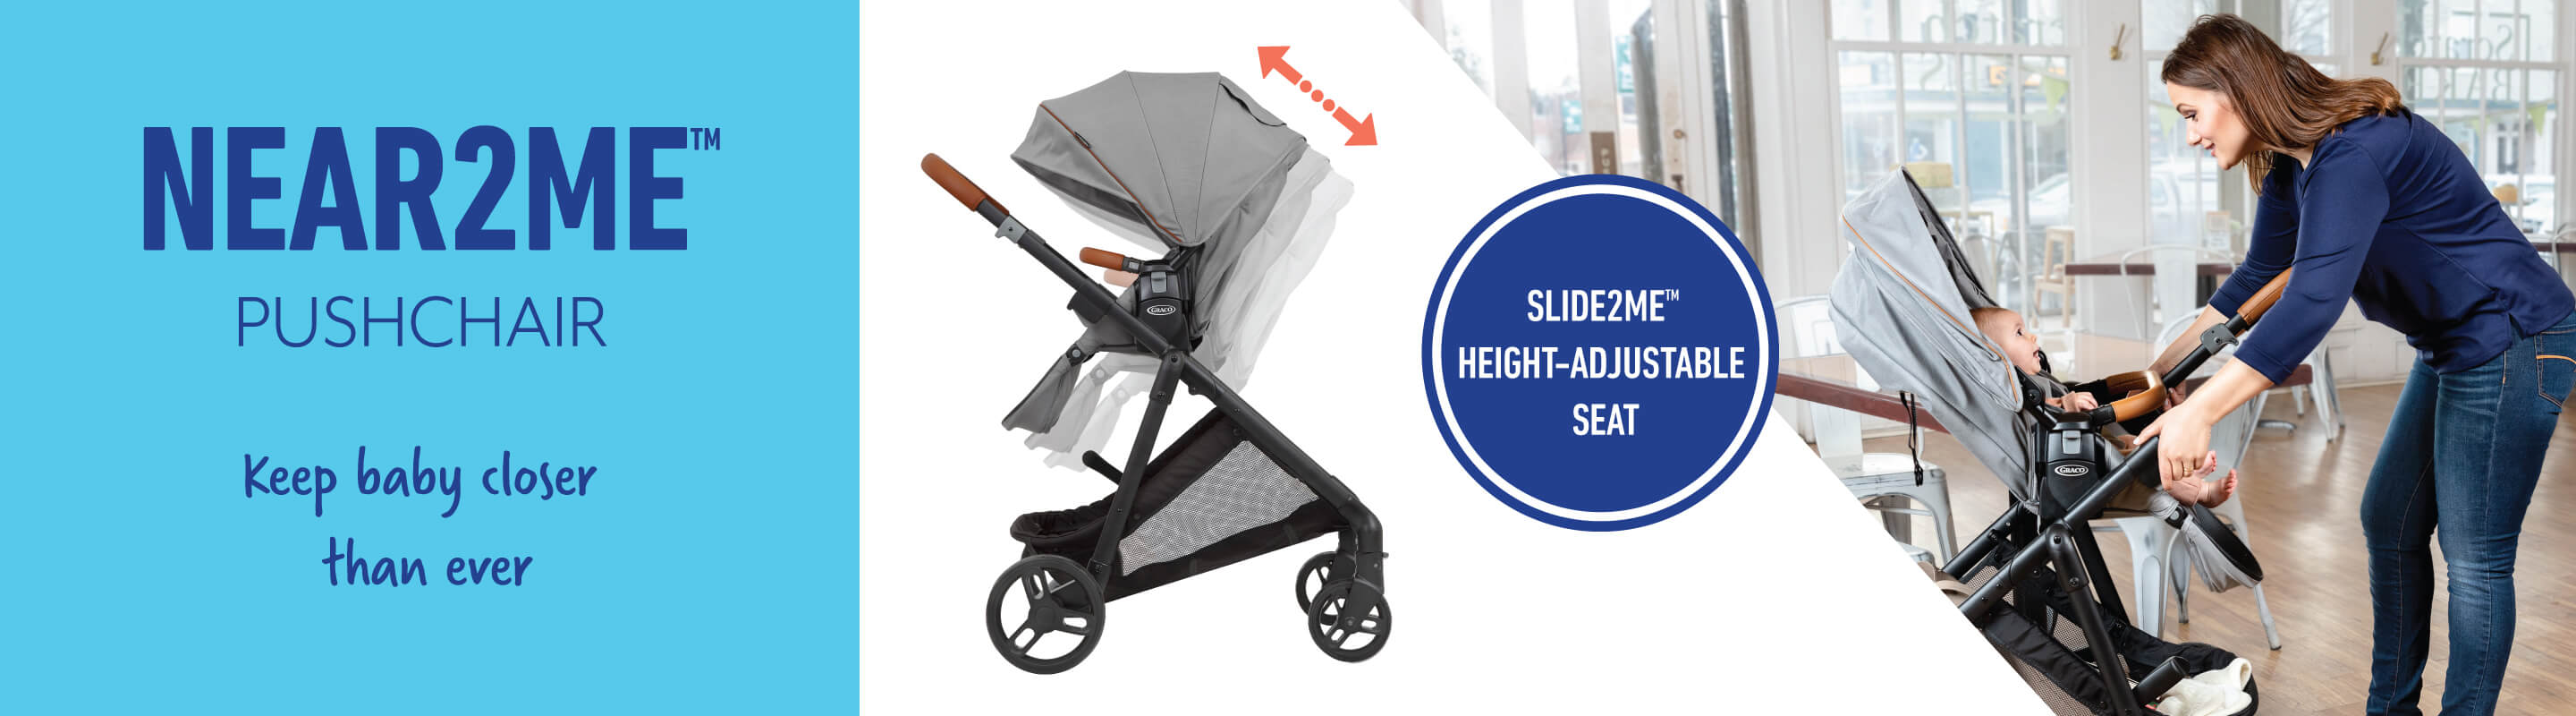 Mum in cafe with baby using Graco Near2Me pushchair with Slide2Me height-adjustable chair text.